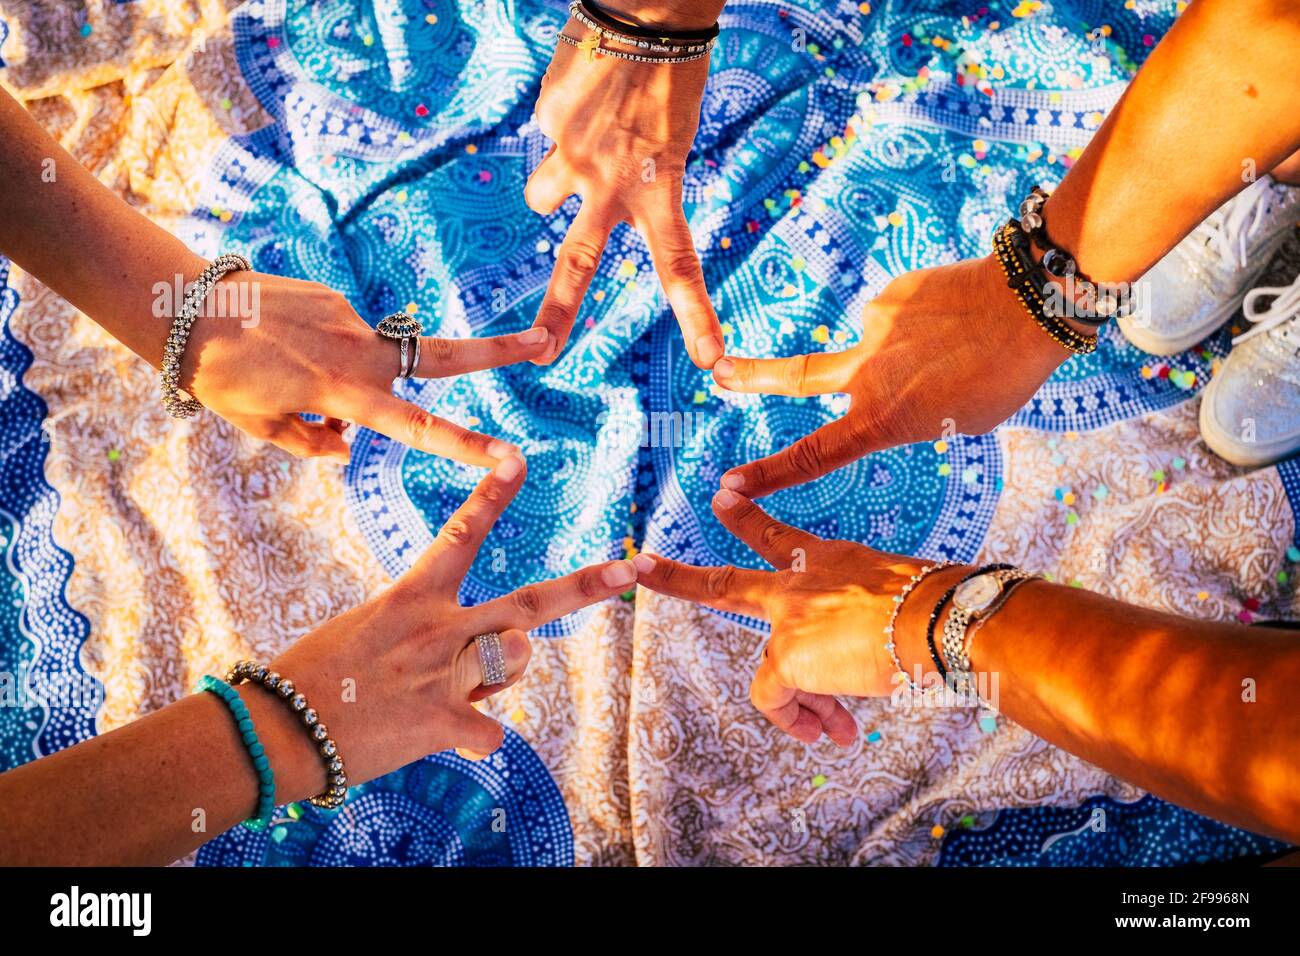 Close up top view of young people putting their hands together. Friends with stack of hands showing unity and teamwork - mandale outdoor background Stock Photo